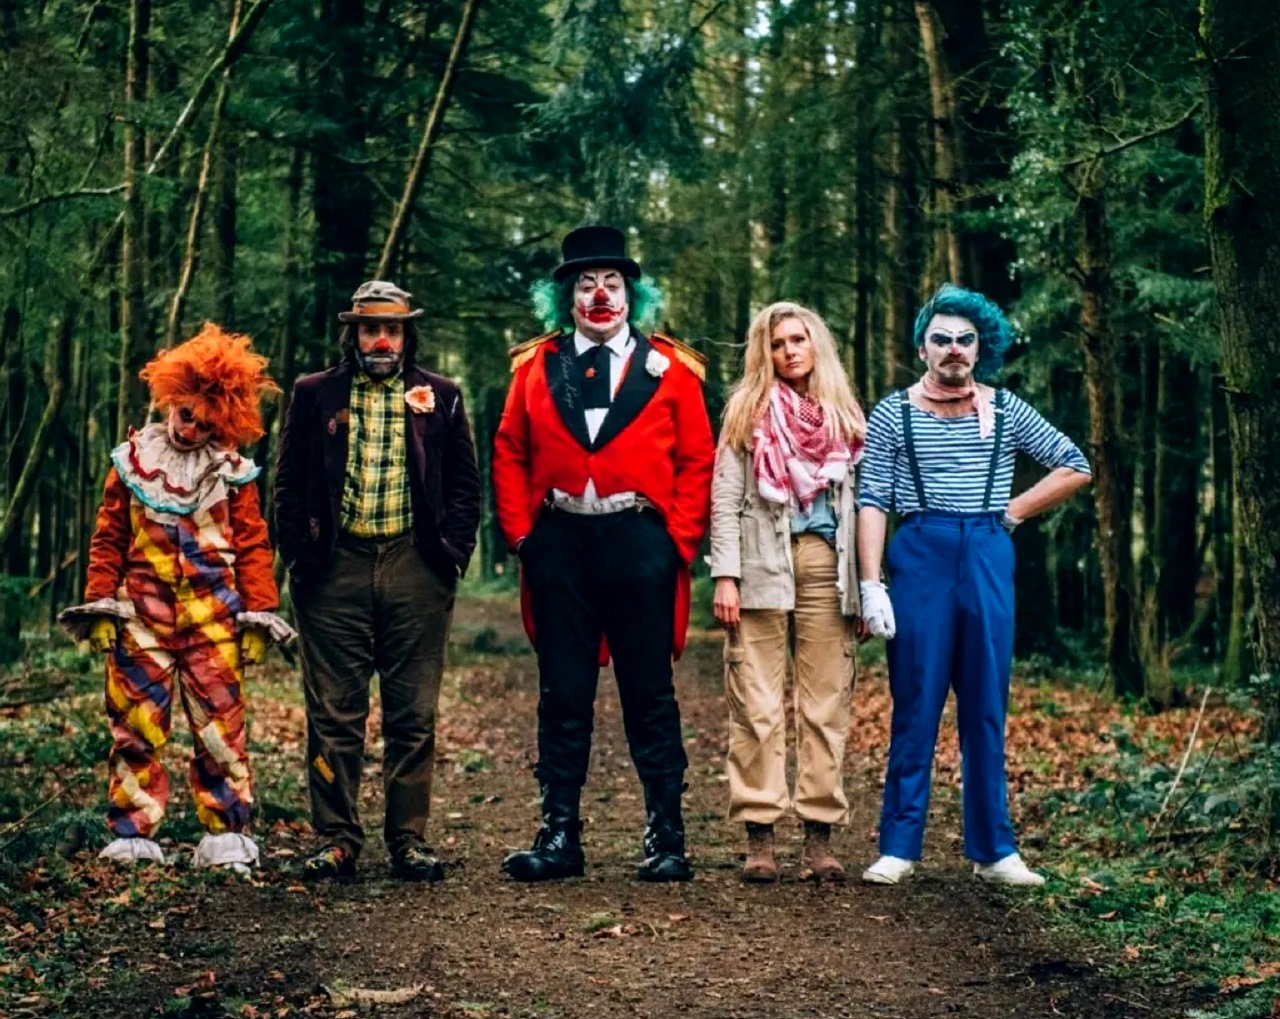 Clowns following the collapse of civilisation - Funzo (Natalie Palamides), Bobo (David Earl), The Great Alphonse (Ivan Kaye), Jenny (Amy De Bruhn) and Pepe (Fionn Foley) in Apocalypse Clown (2023)